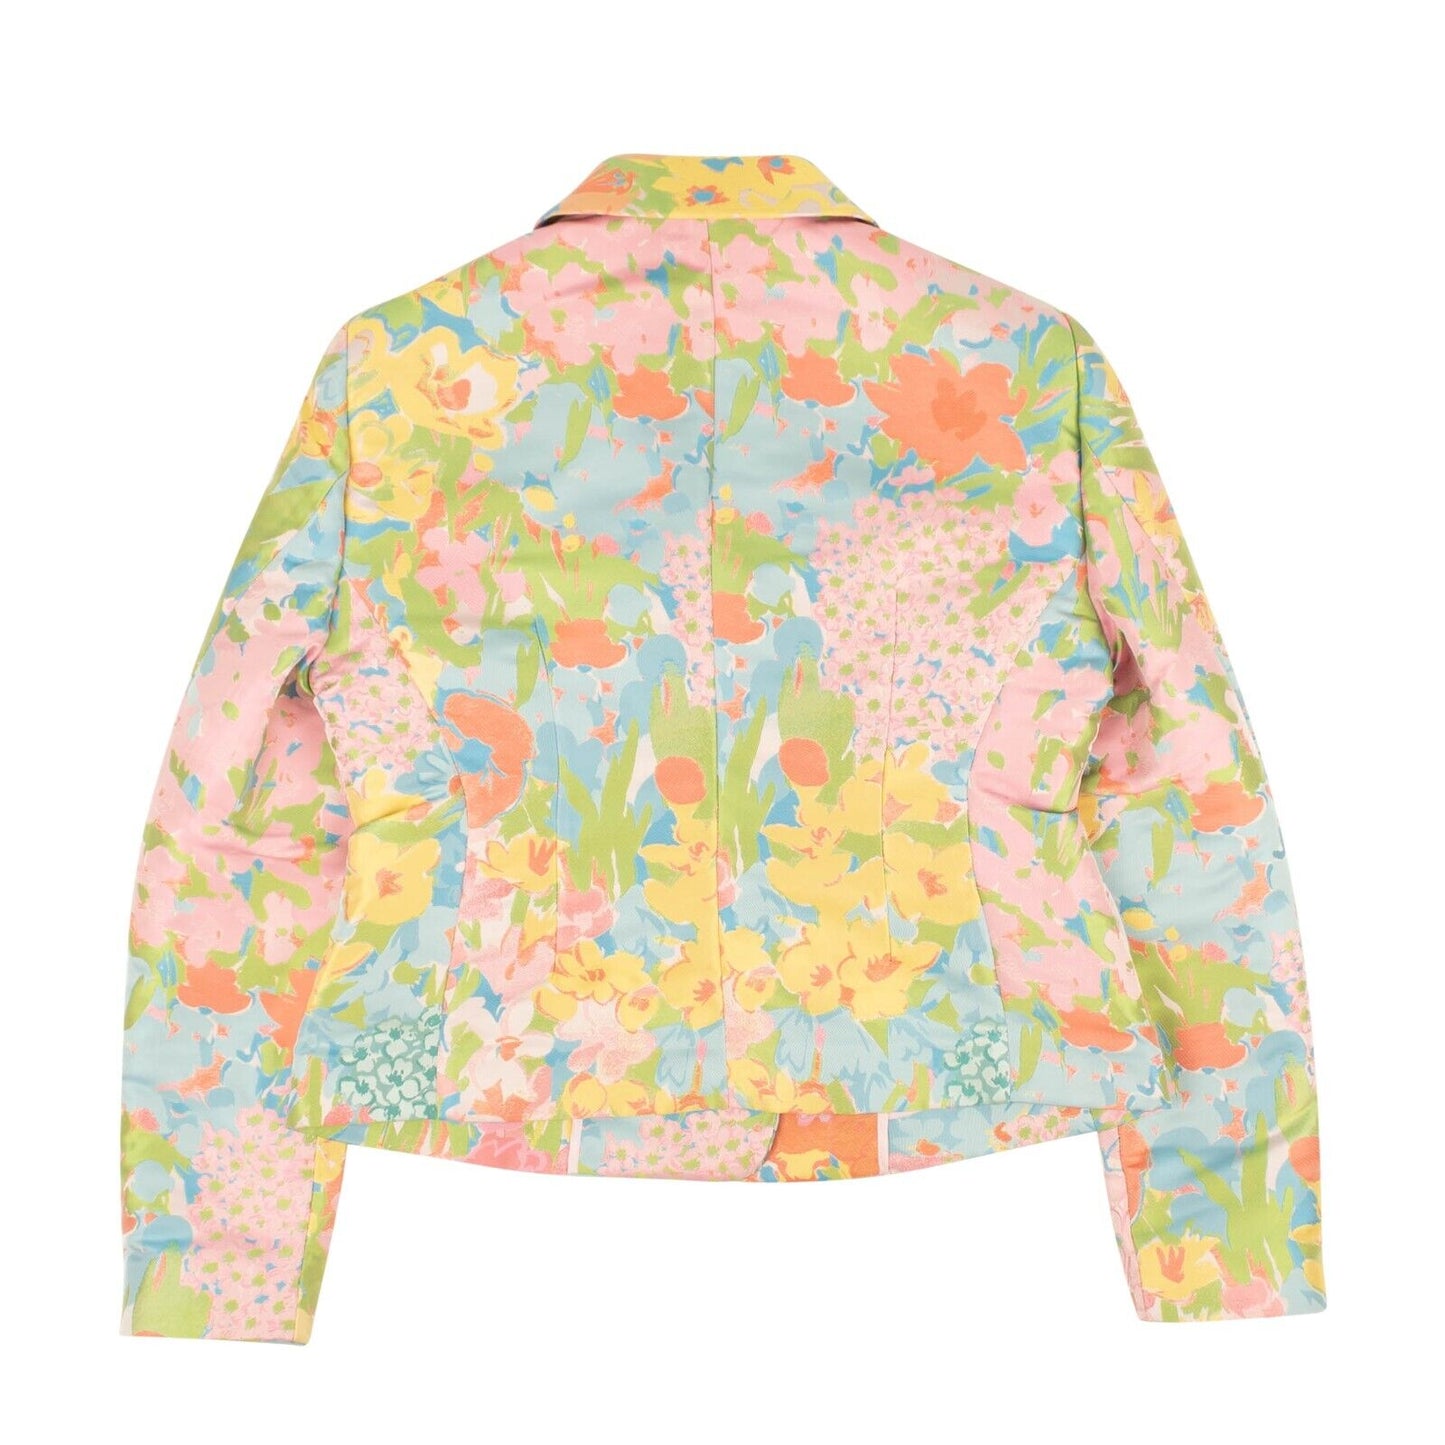 NWT BOUTIQUE MOSCHINO Multi Spring Floral Evening Short Jacket